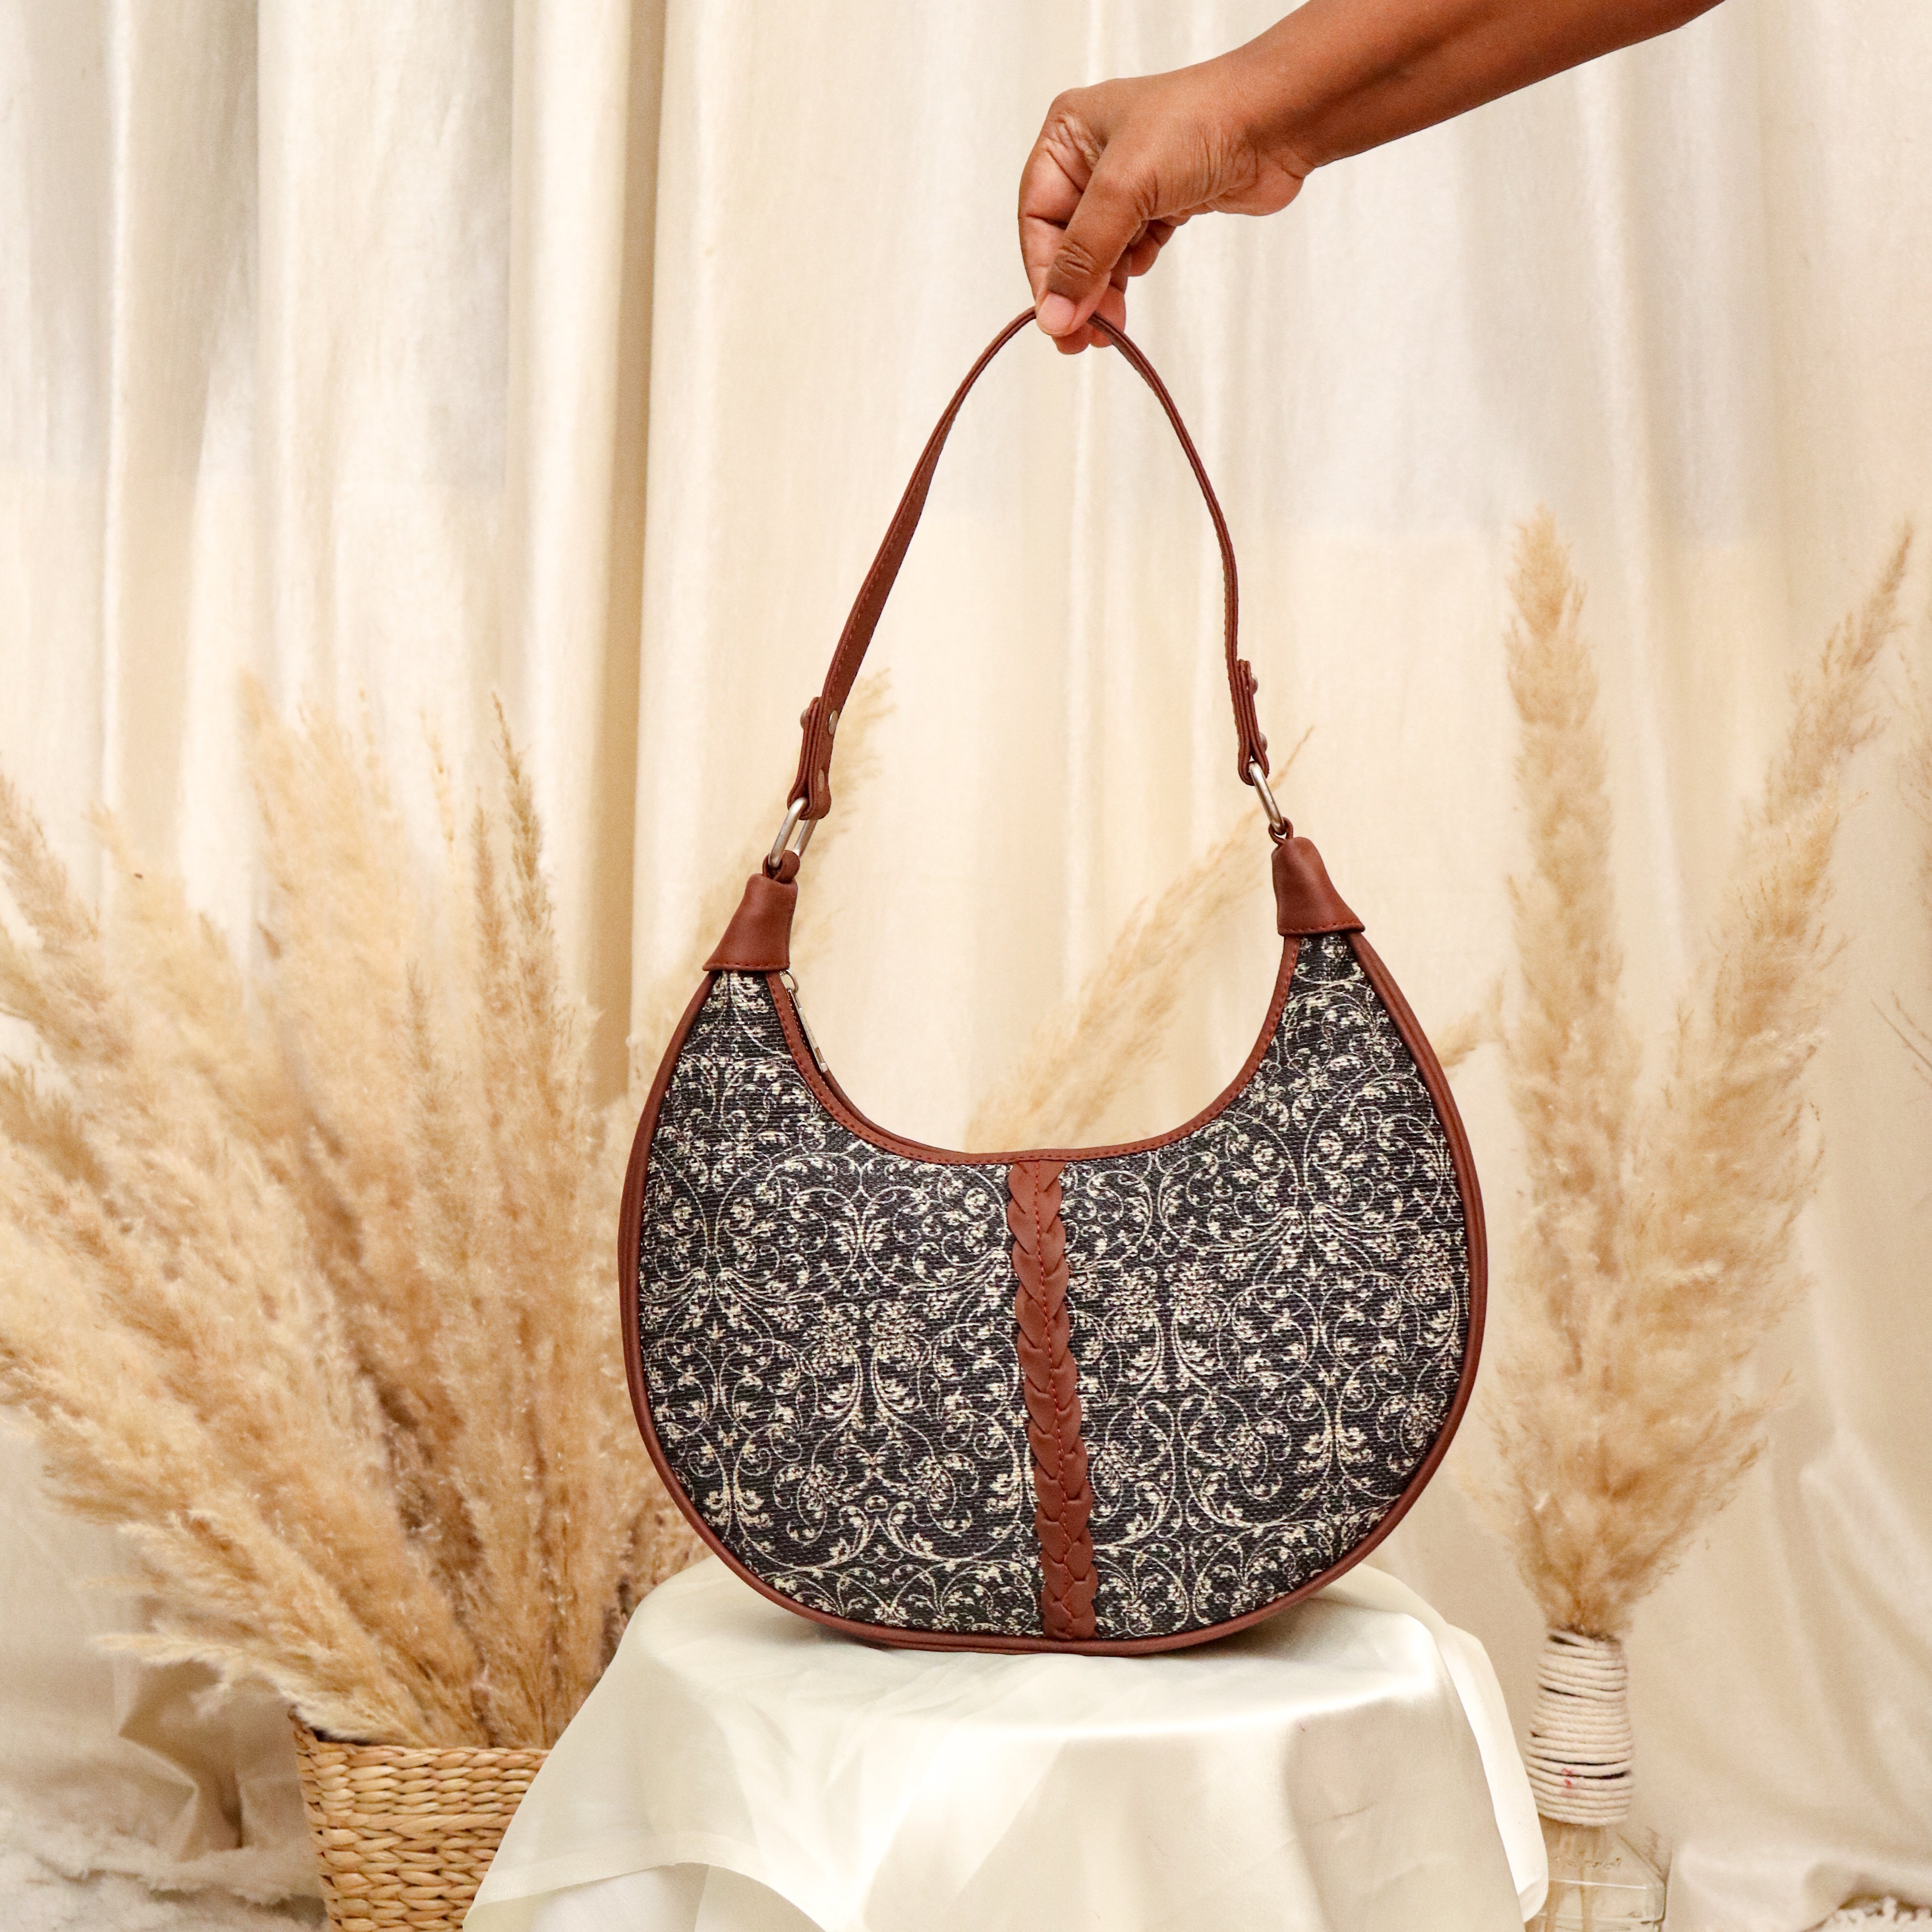 Tatted lace on a bag – Ranjana's Craft Blog